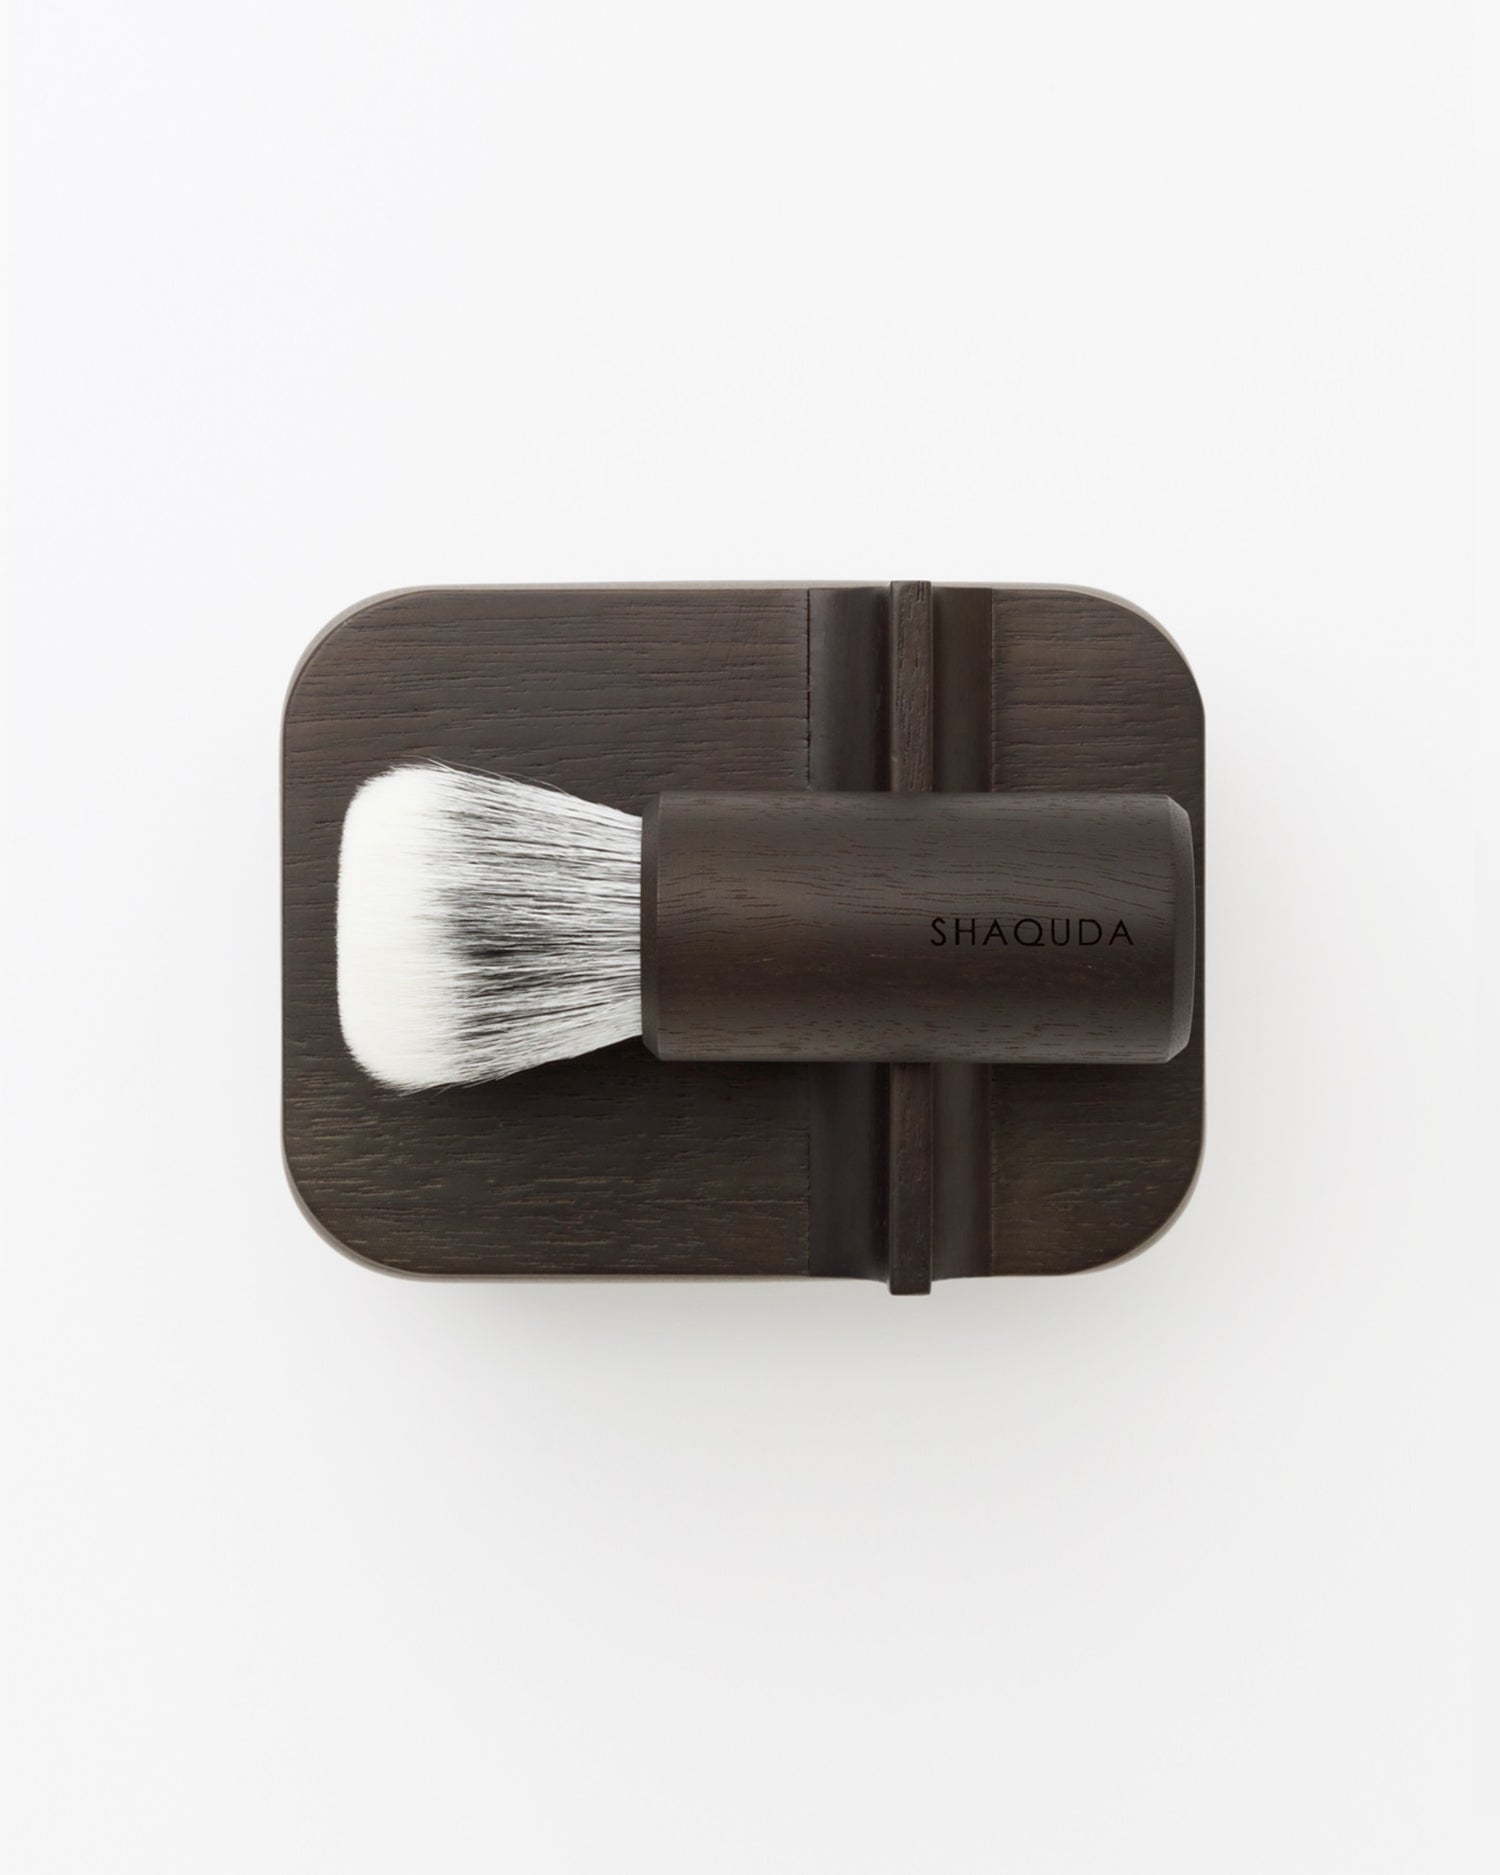 Bird's-eye-view of soft Jiva face cleansing and shaving series with walnut, boar bristle, and goat hair brush on top of porcelain bowl by Shaquda against white-gray background.